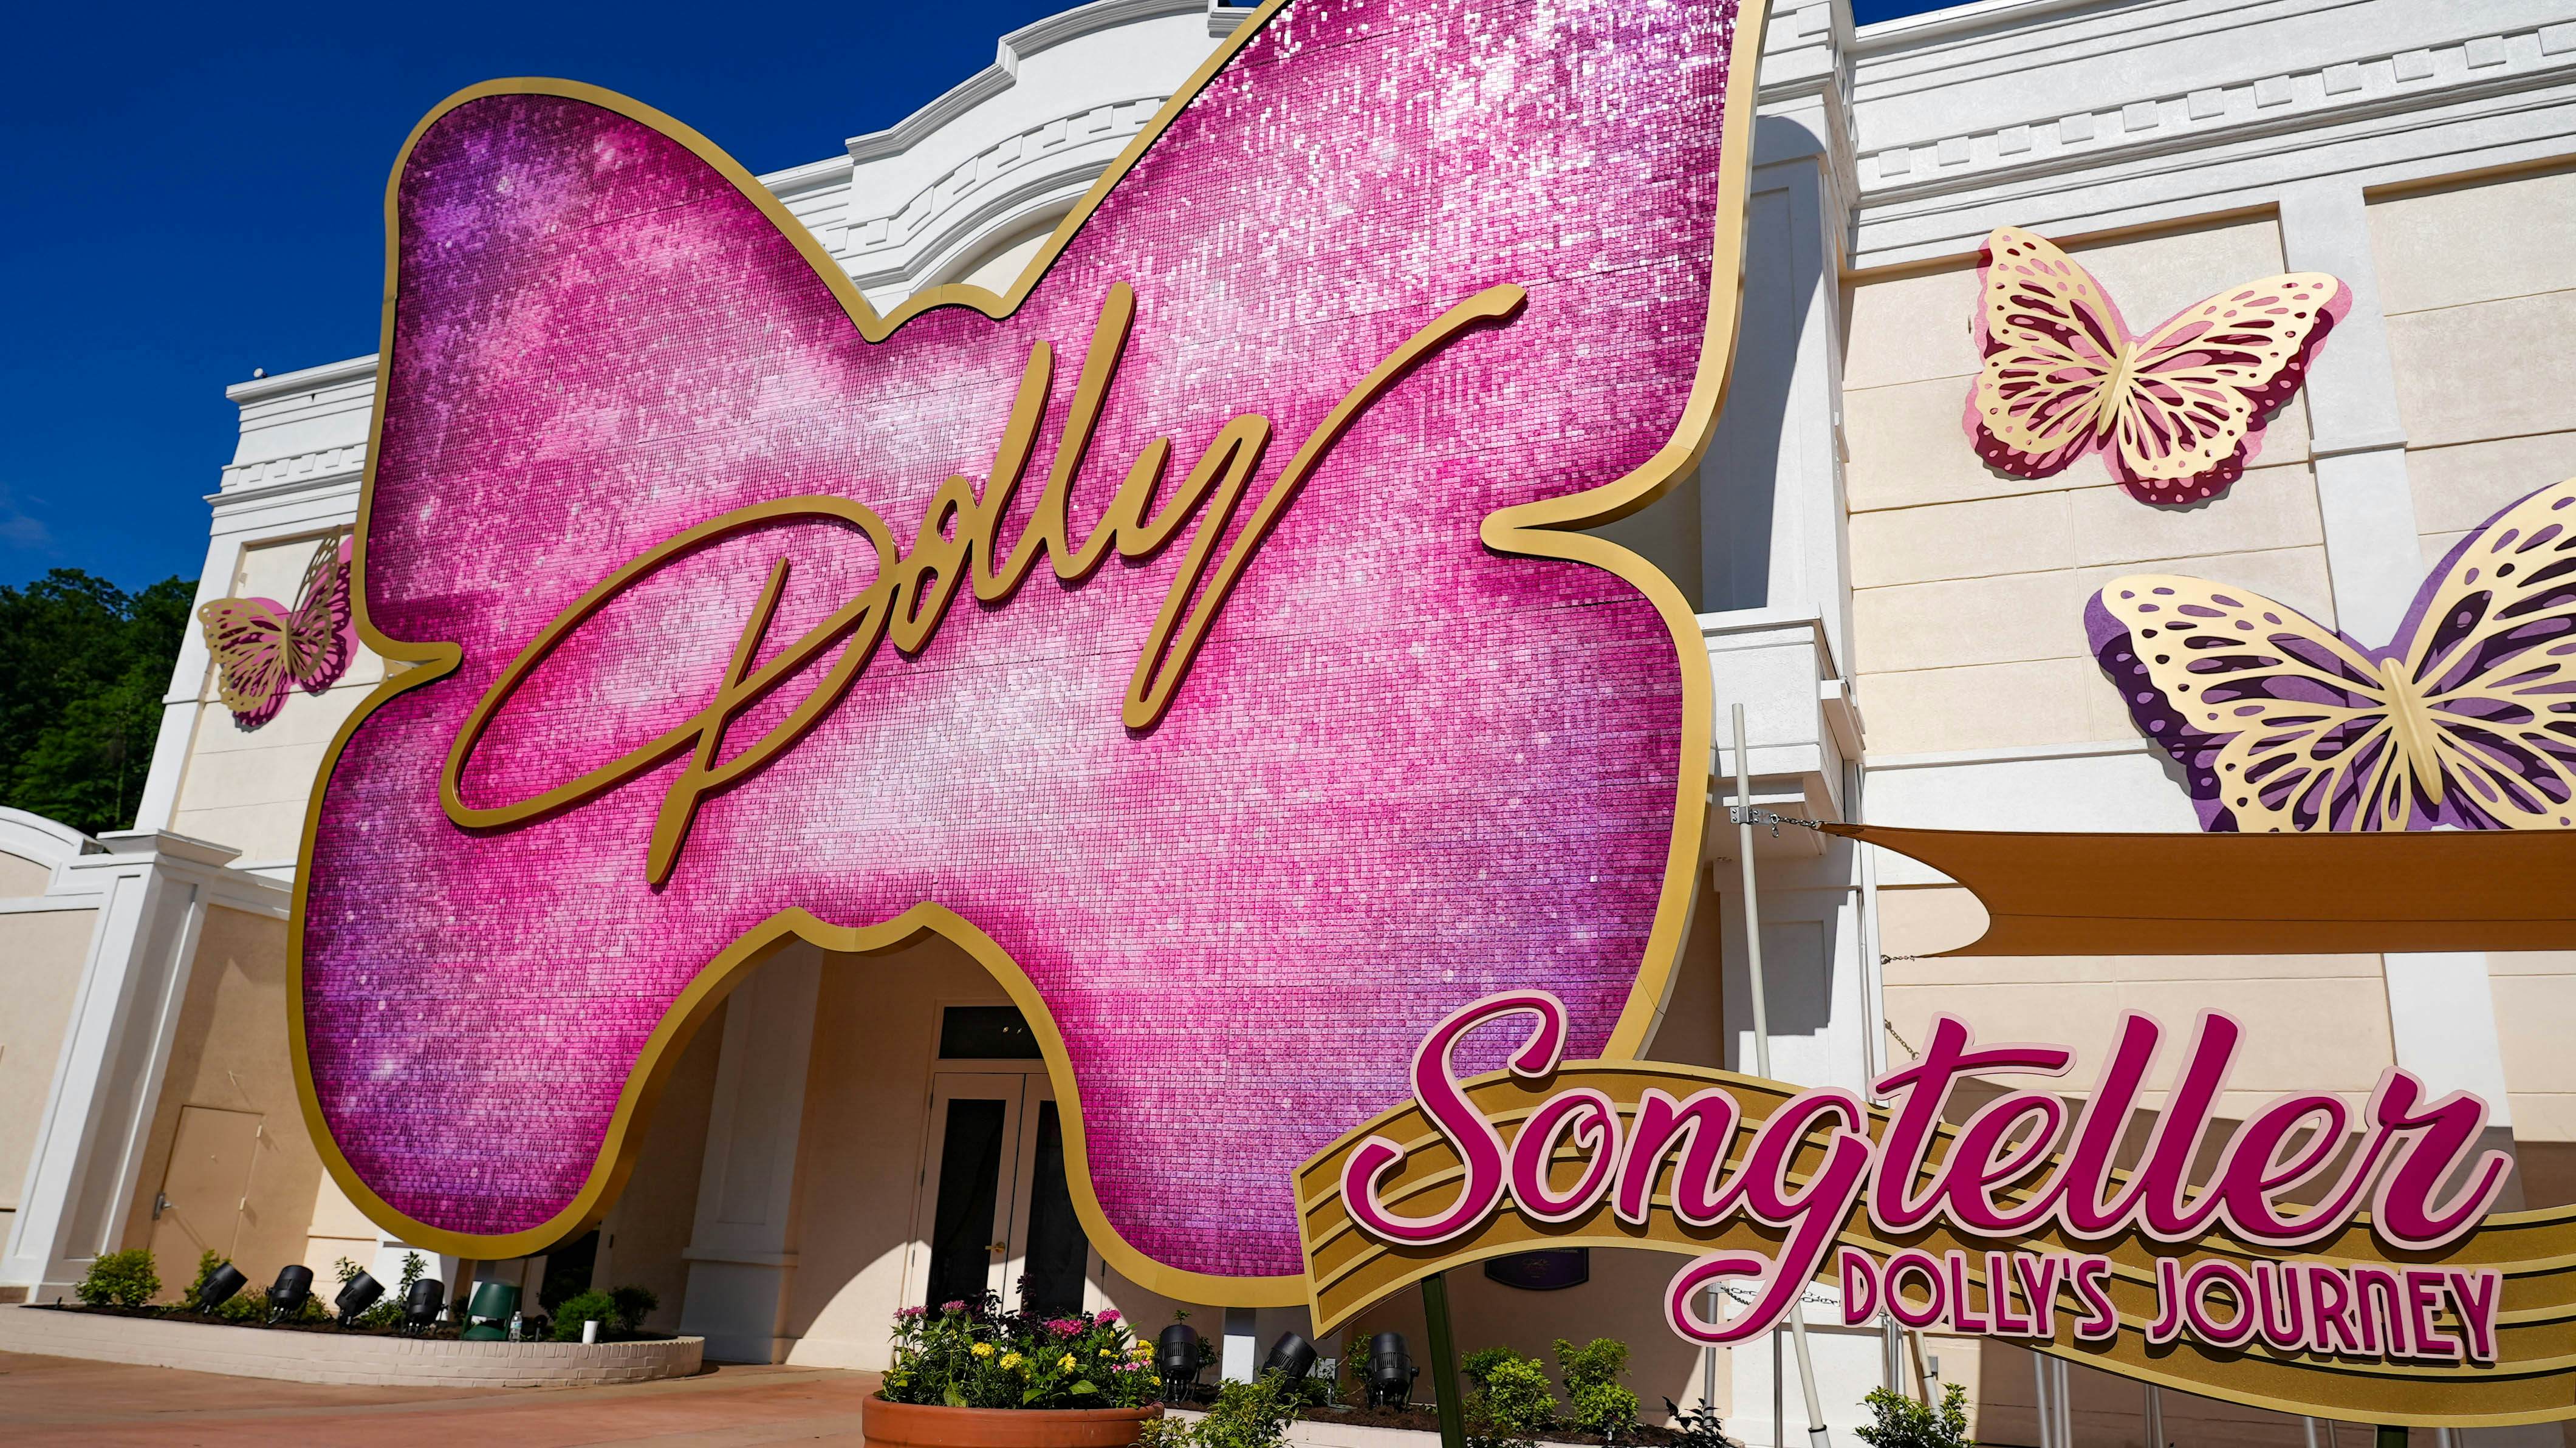 Dolly Parton unveils Dollywood’s newest attraction